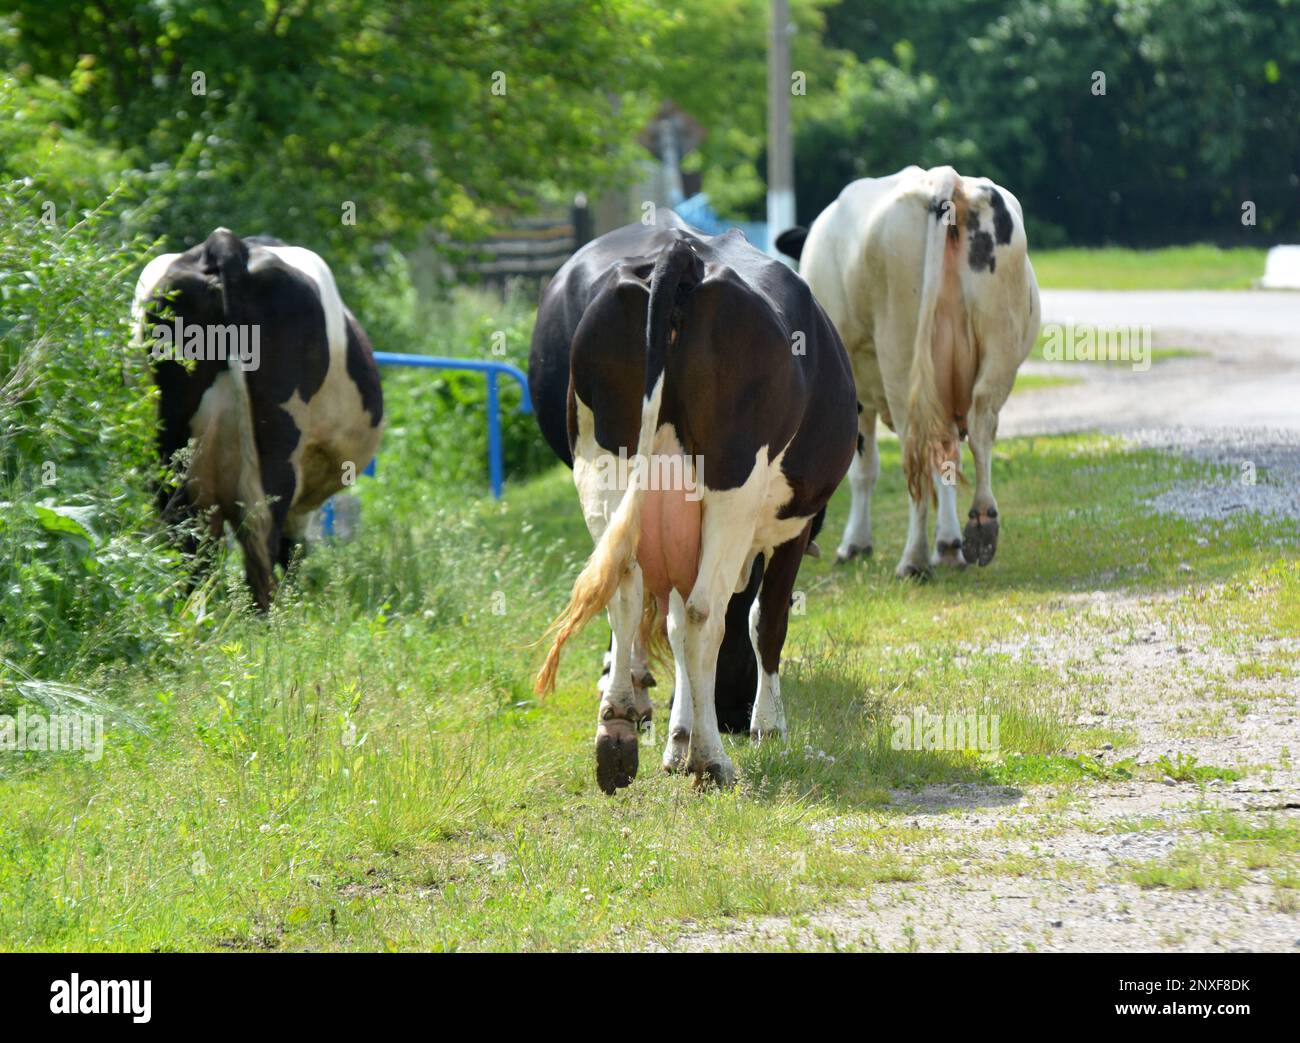 On a village street, cattle from a private farm return home from grazing. Stock Photo